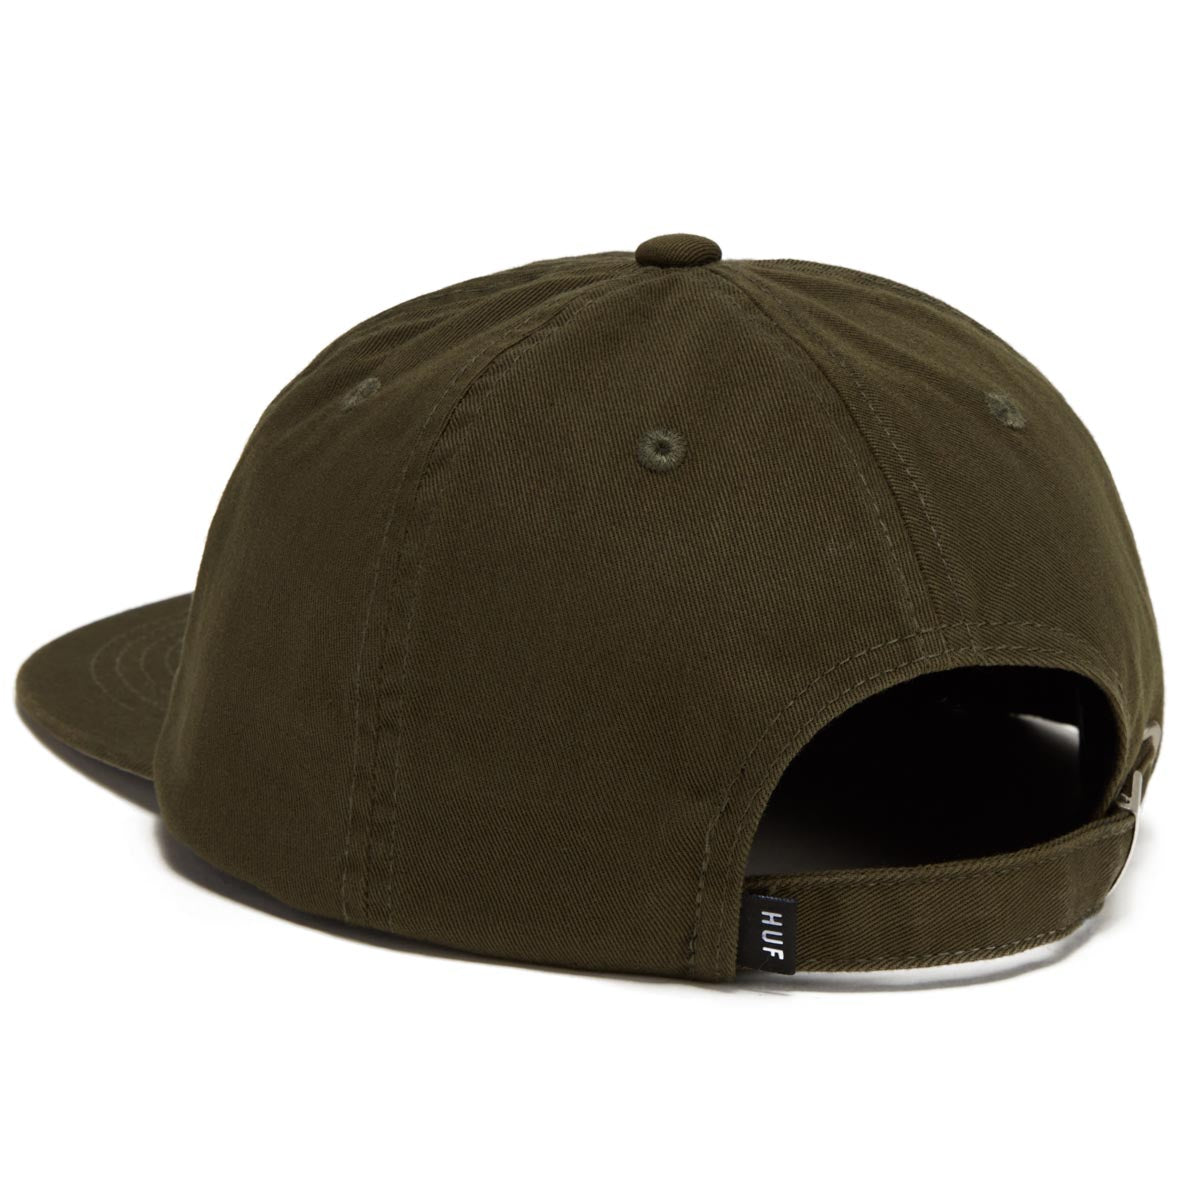 HUF Fuck It 6 Panel Hat - Dried Herb image 2